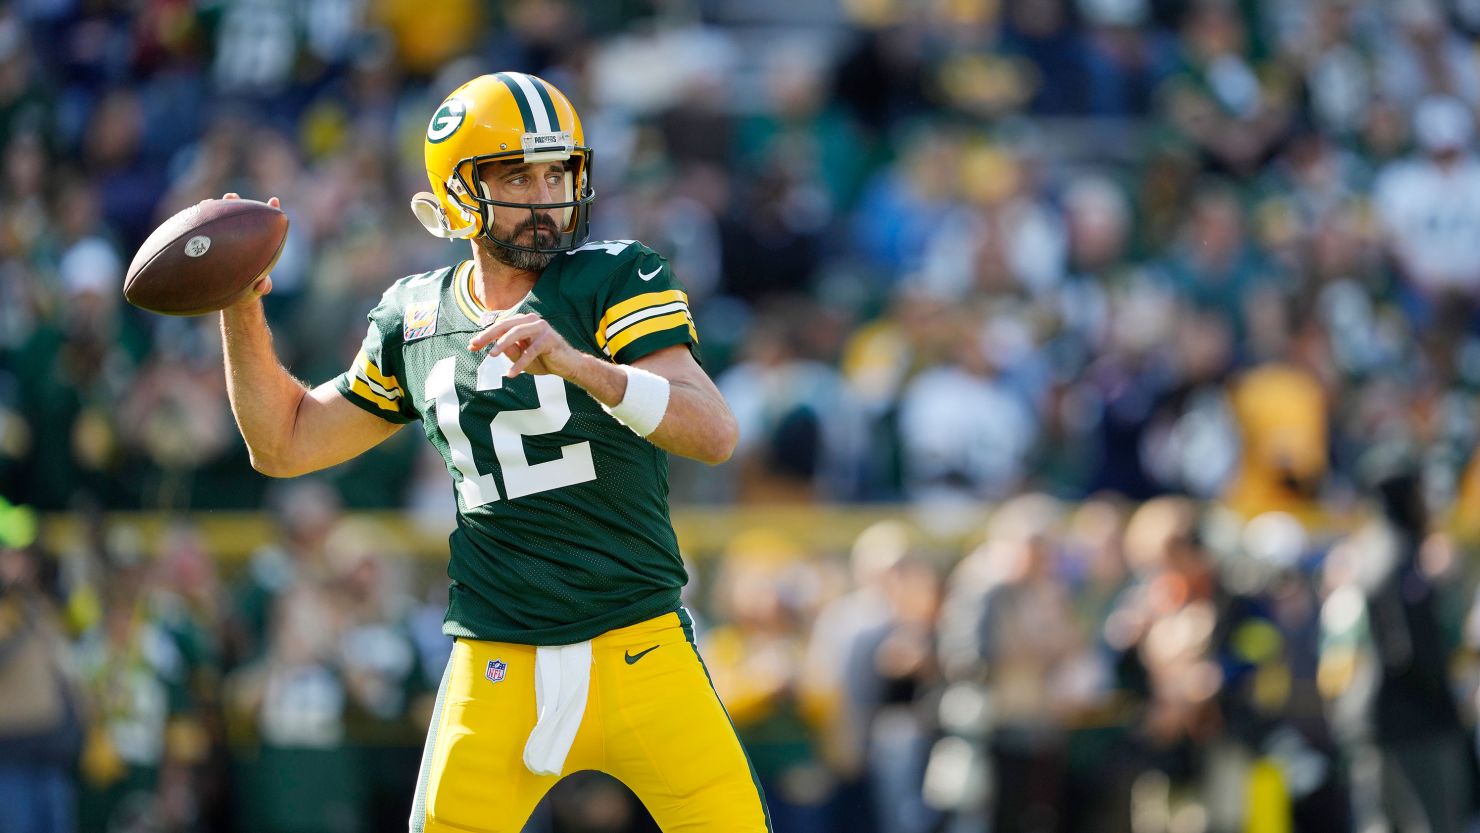 Aaron Rodgers and the Green Bay Packers travel to London this weekend.